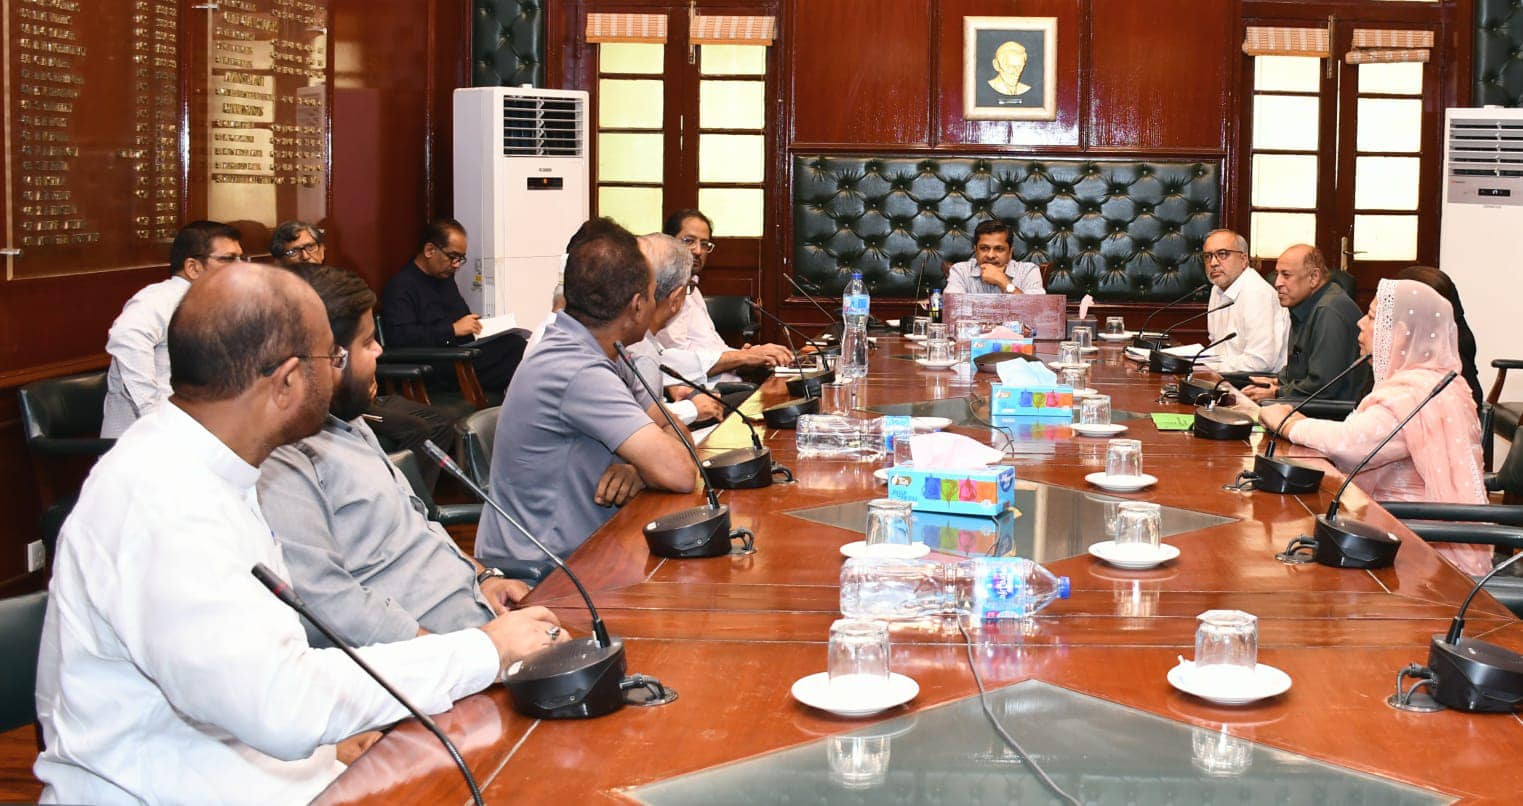 Karachi (27 June): The Commissioner Karachi Syed Hassan Naqvi chairs a meeting regarding the council of libraries in the Karachi division. The concerned officials attended the meeting.